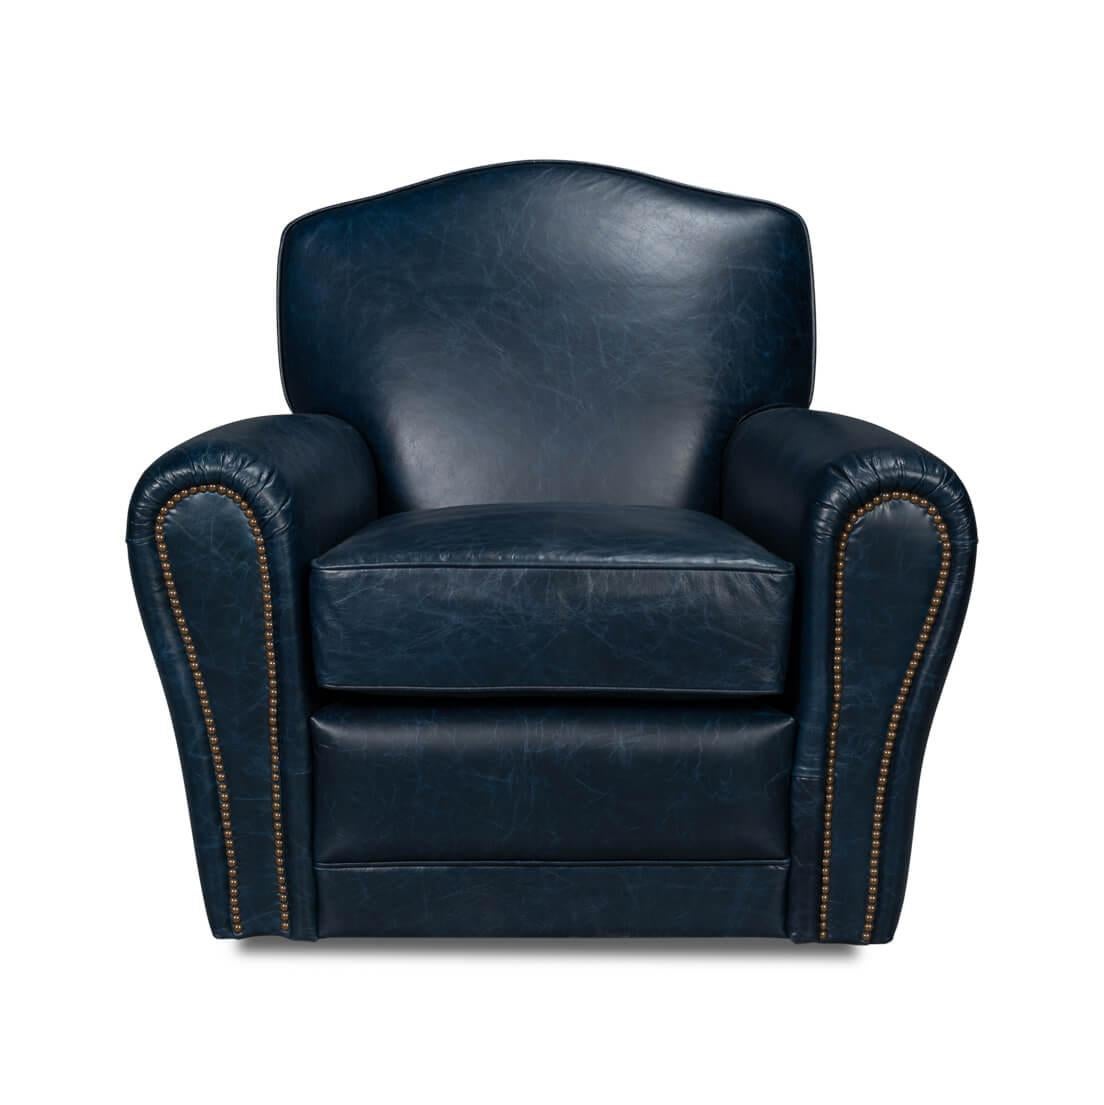 Art Deco style leather upholstered club chair, in Chateau Blue leather, with long rolled arms, a padded seat back, and cushions, with detailed nailhead trim and raised on a swivel base.
Dimensions: 36